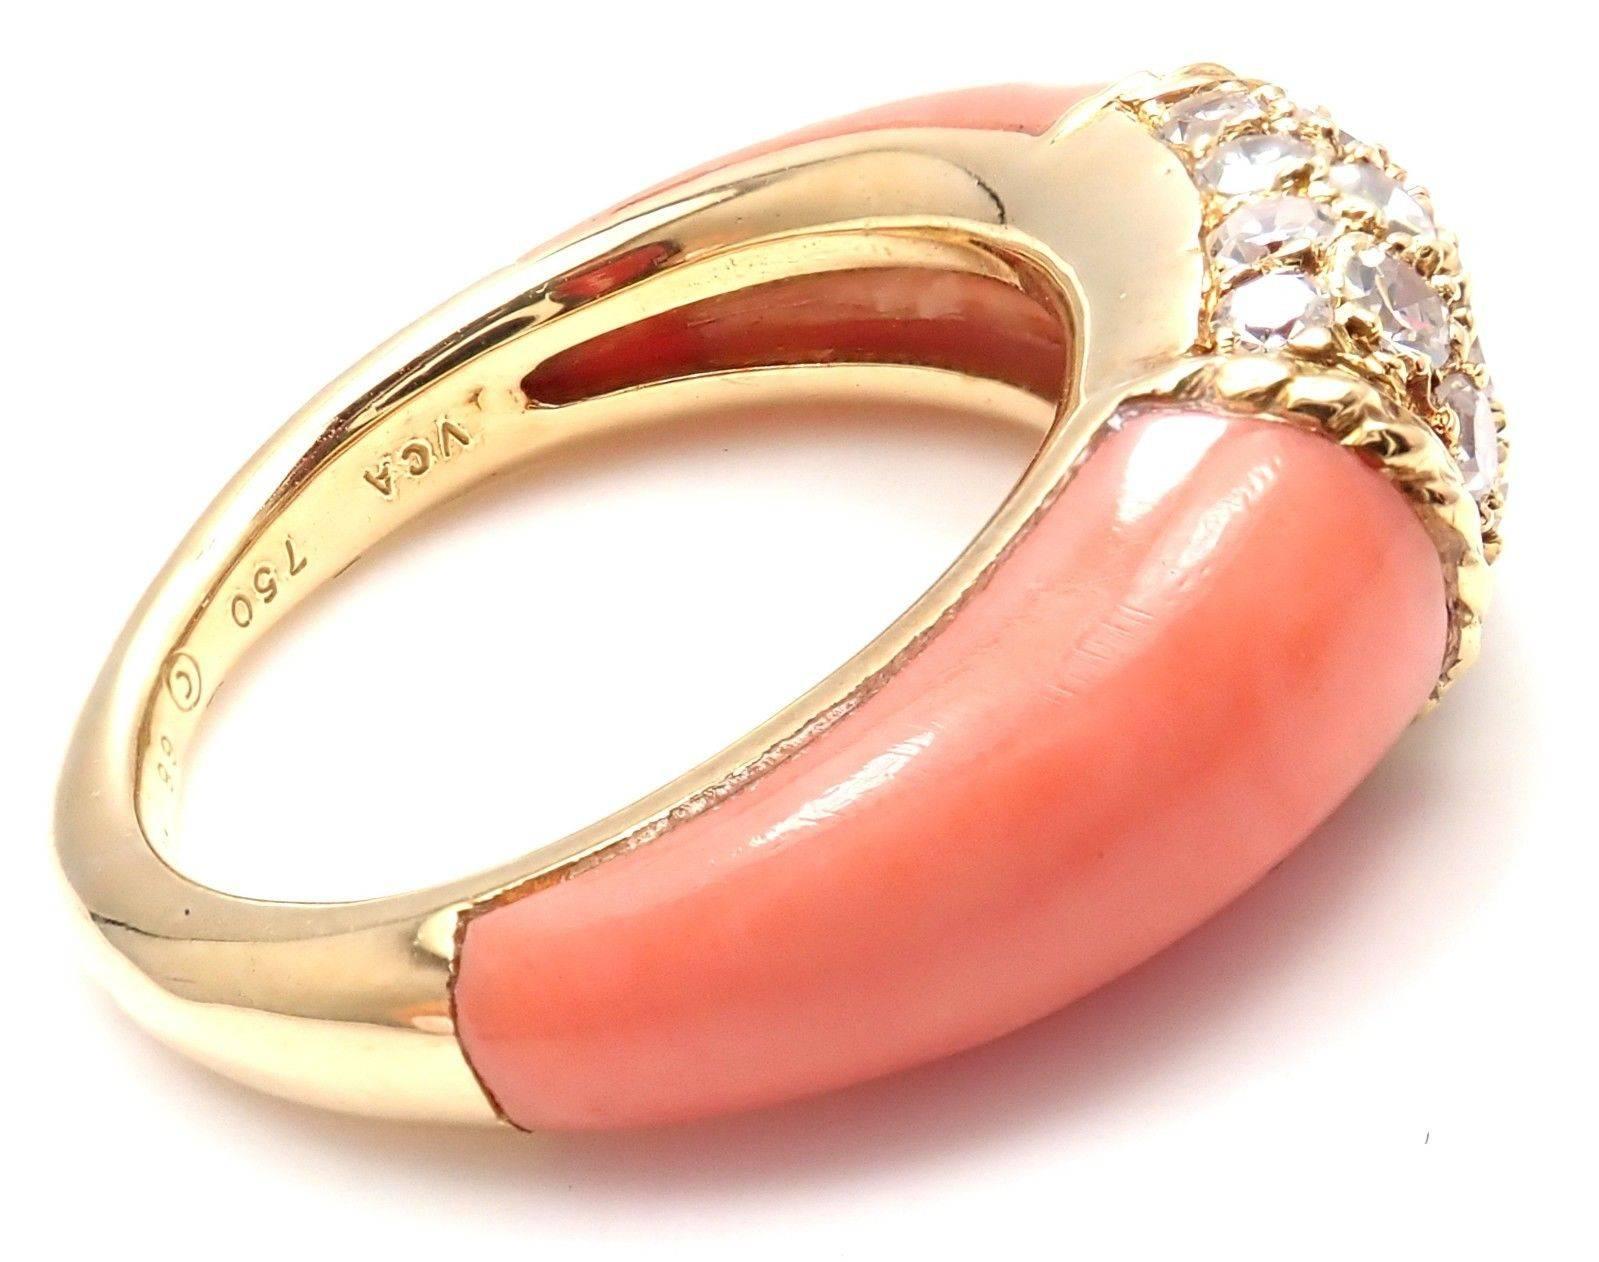 18k Yellow Gold Diamond & Coral Band Ring by Van Cleef & Arpels. 
With 18 round brilliant cut diamond VS1 clarity, G color total weight .50ct
Onyx. And 2 beautiful coral stones 14mm x 7mm.
Details: 
Ring Size: 5 (resize available) 
Weight: 6.2